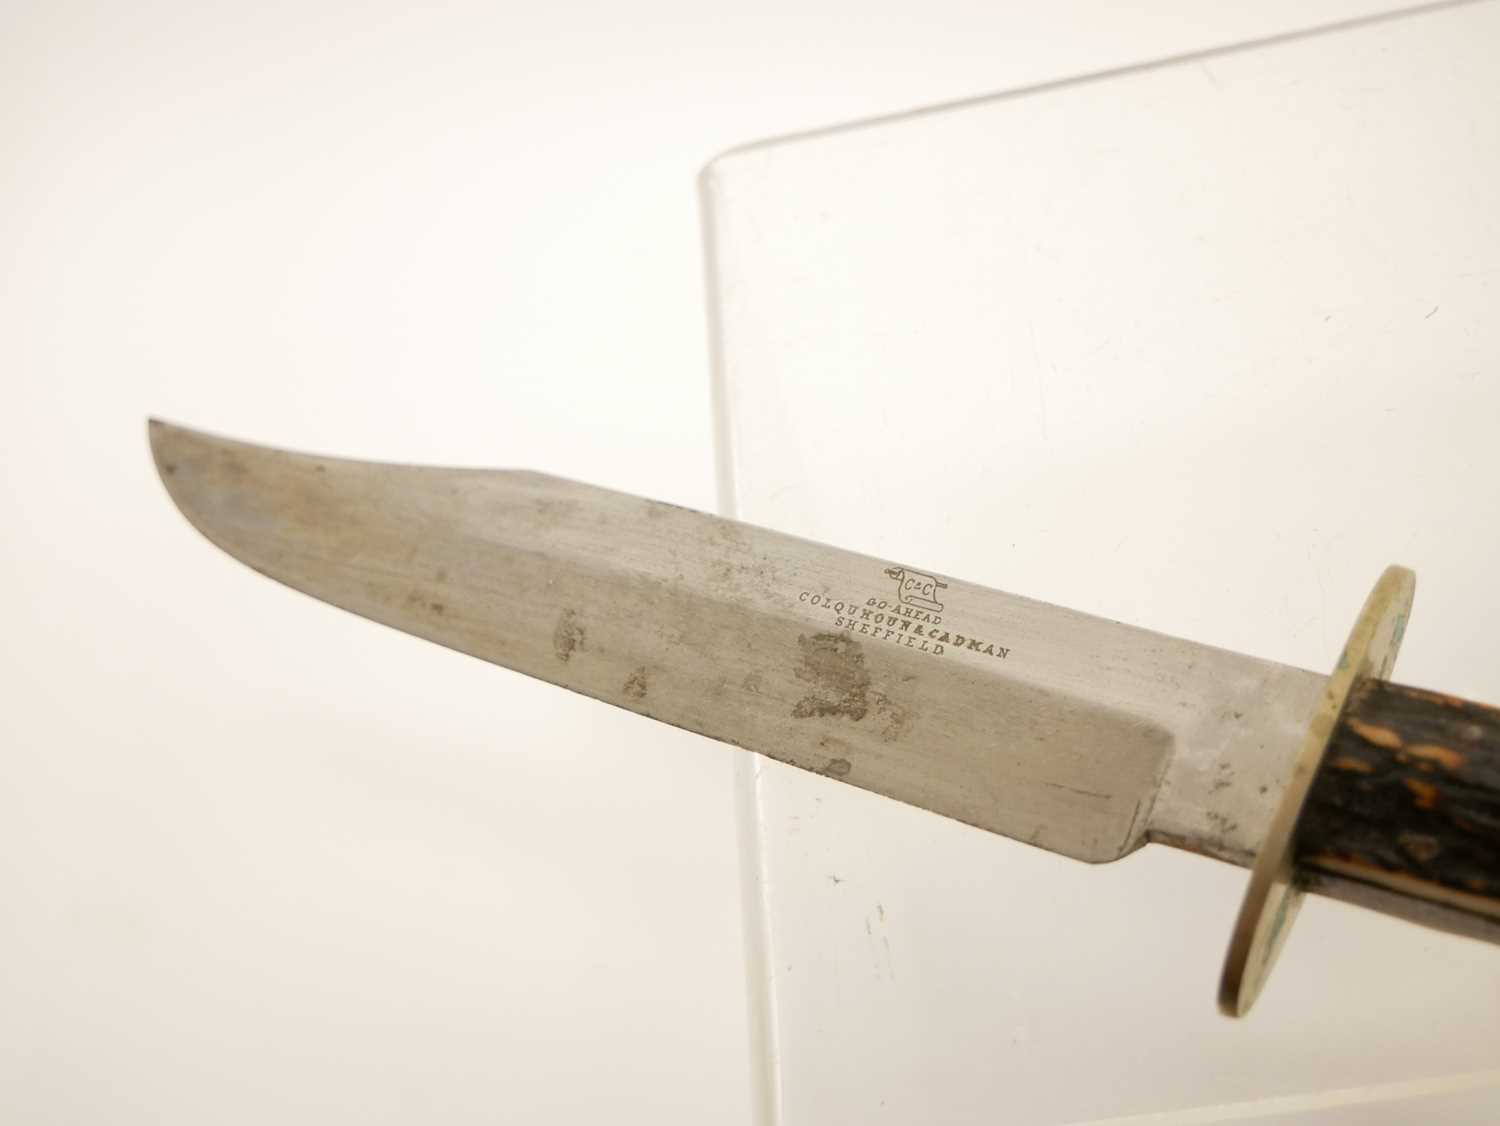 Sheffield bowie knife for the American market, c.1890 by Colquhoun and Cadman, stag horn grips, - Image 5 of 6